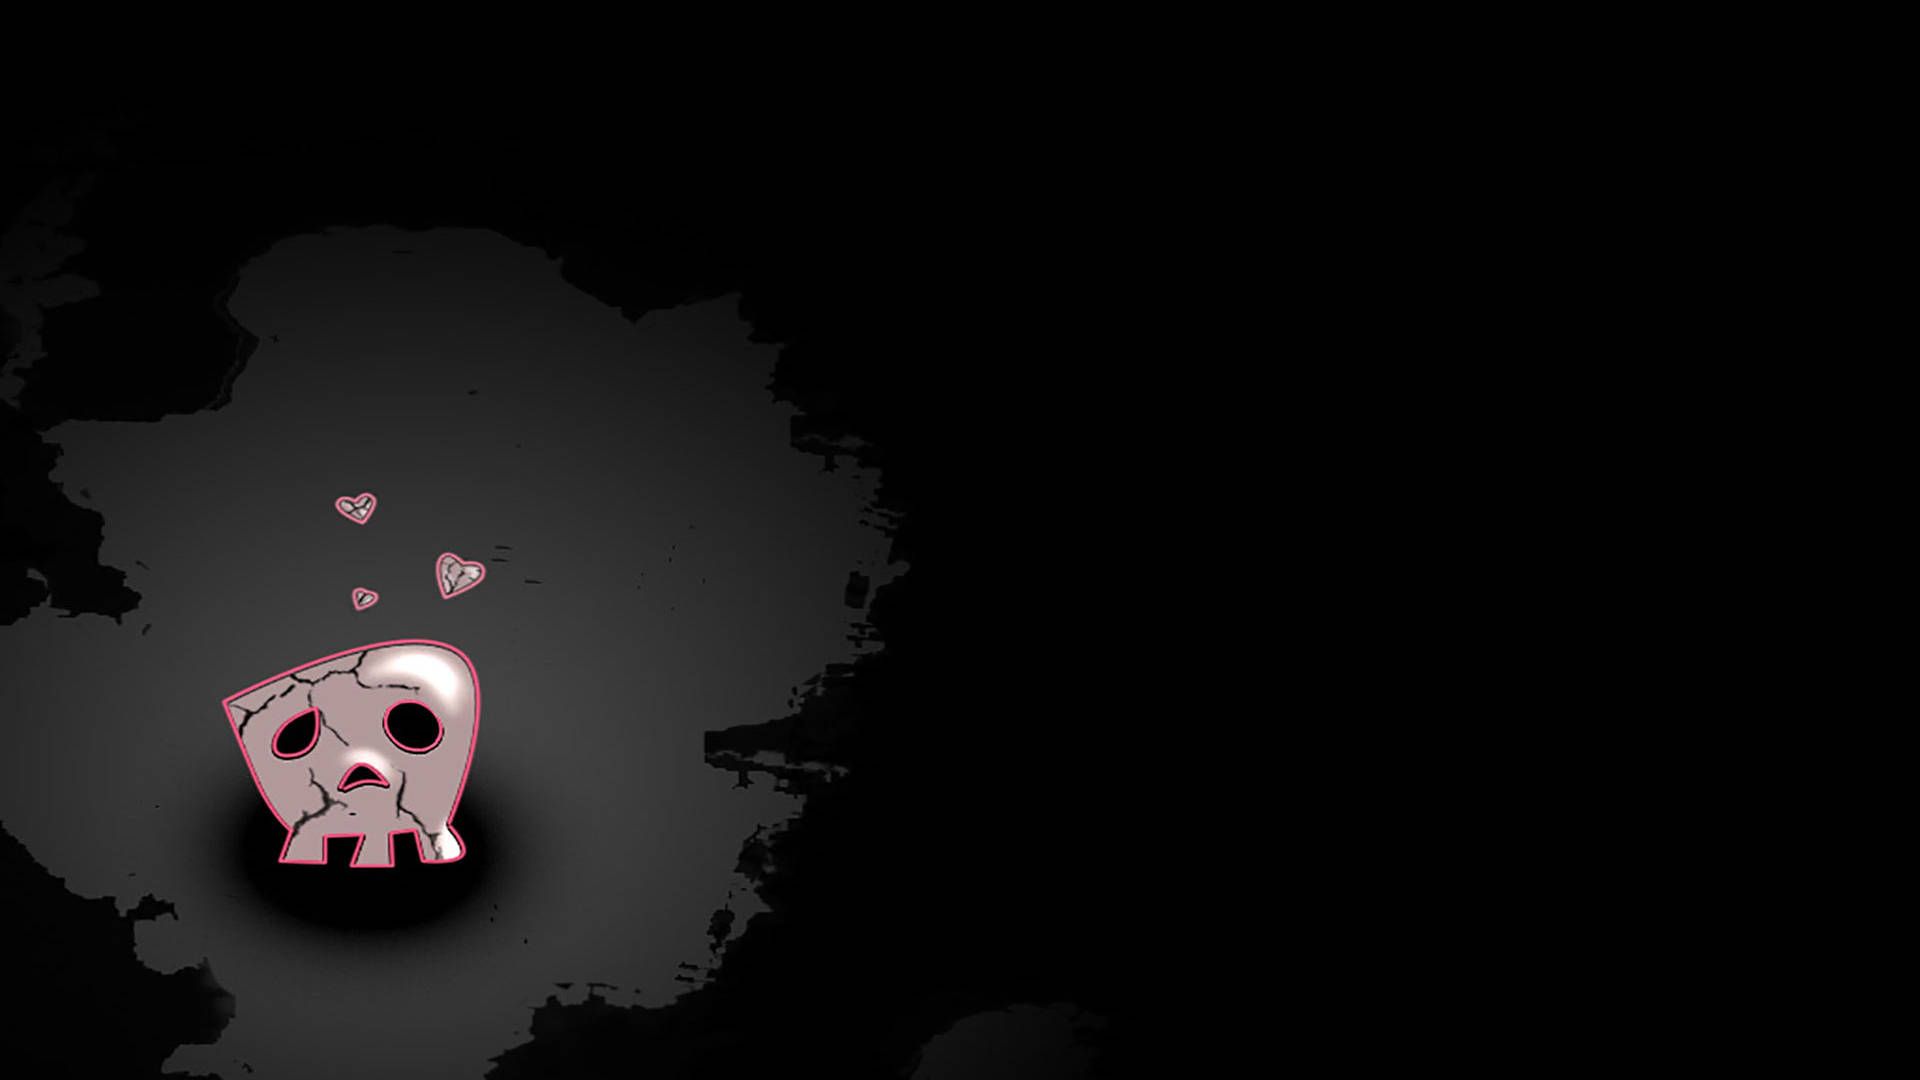 A black background with pink hearts and an image of the word love - Depression